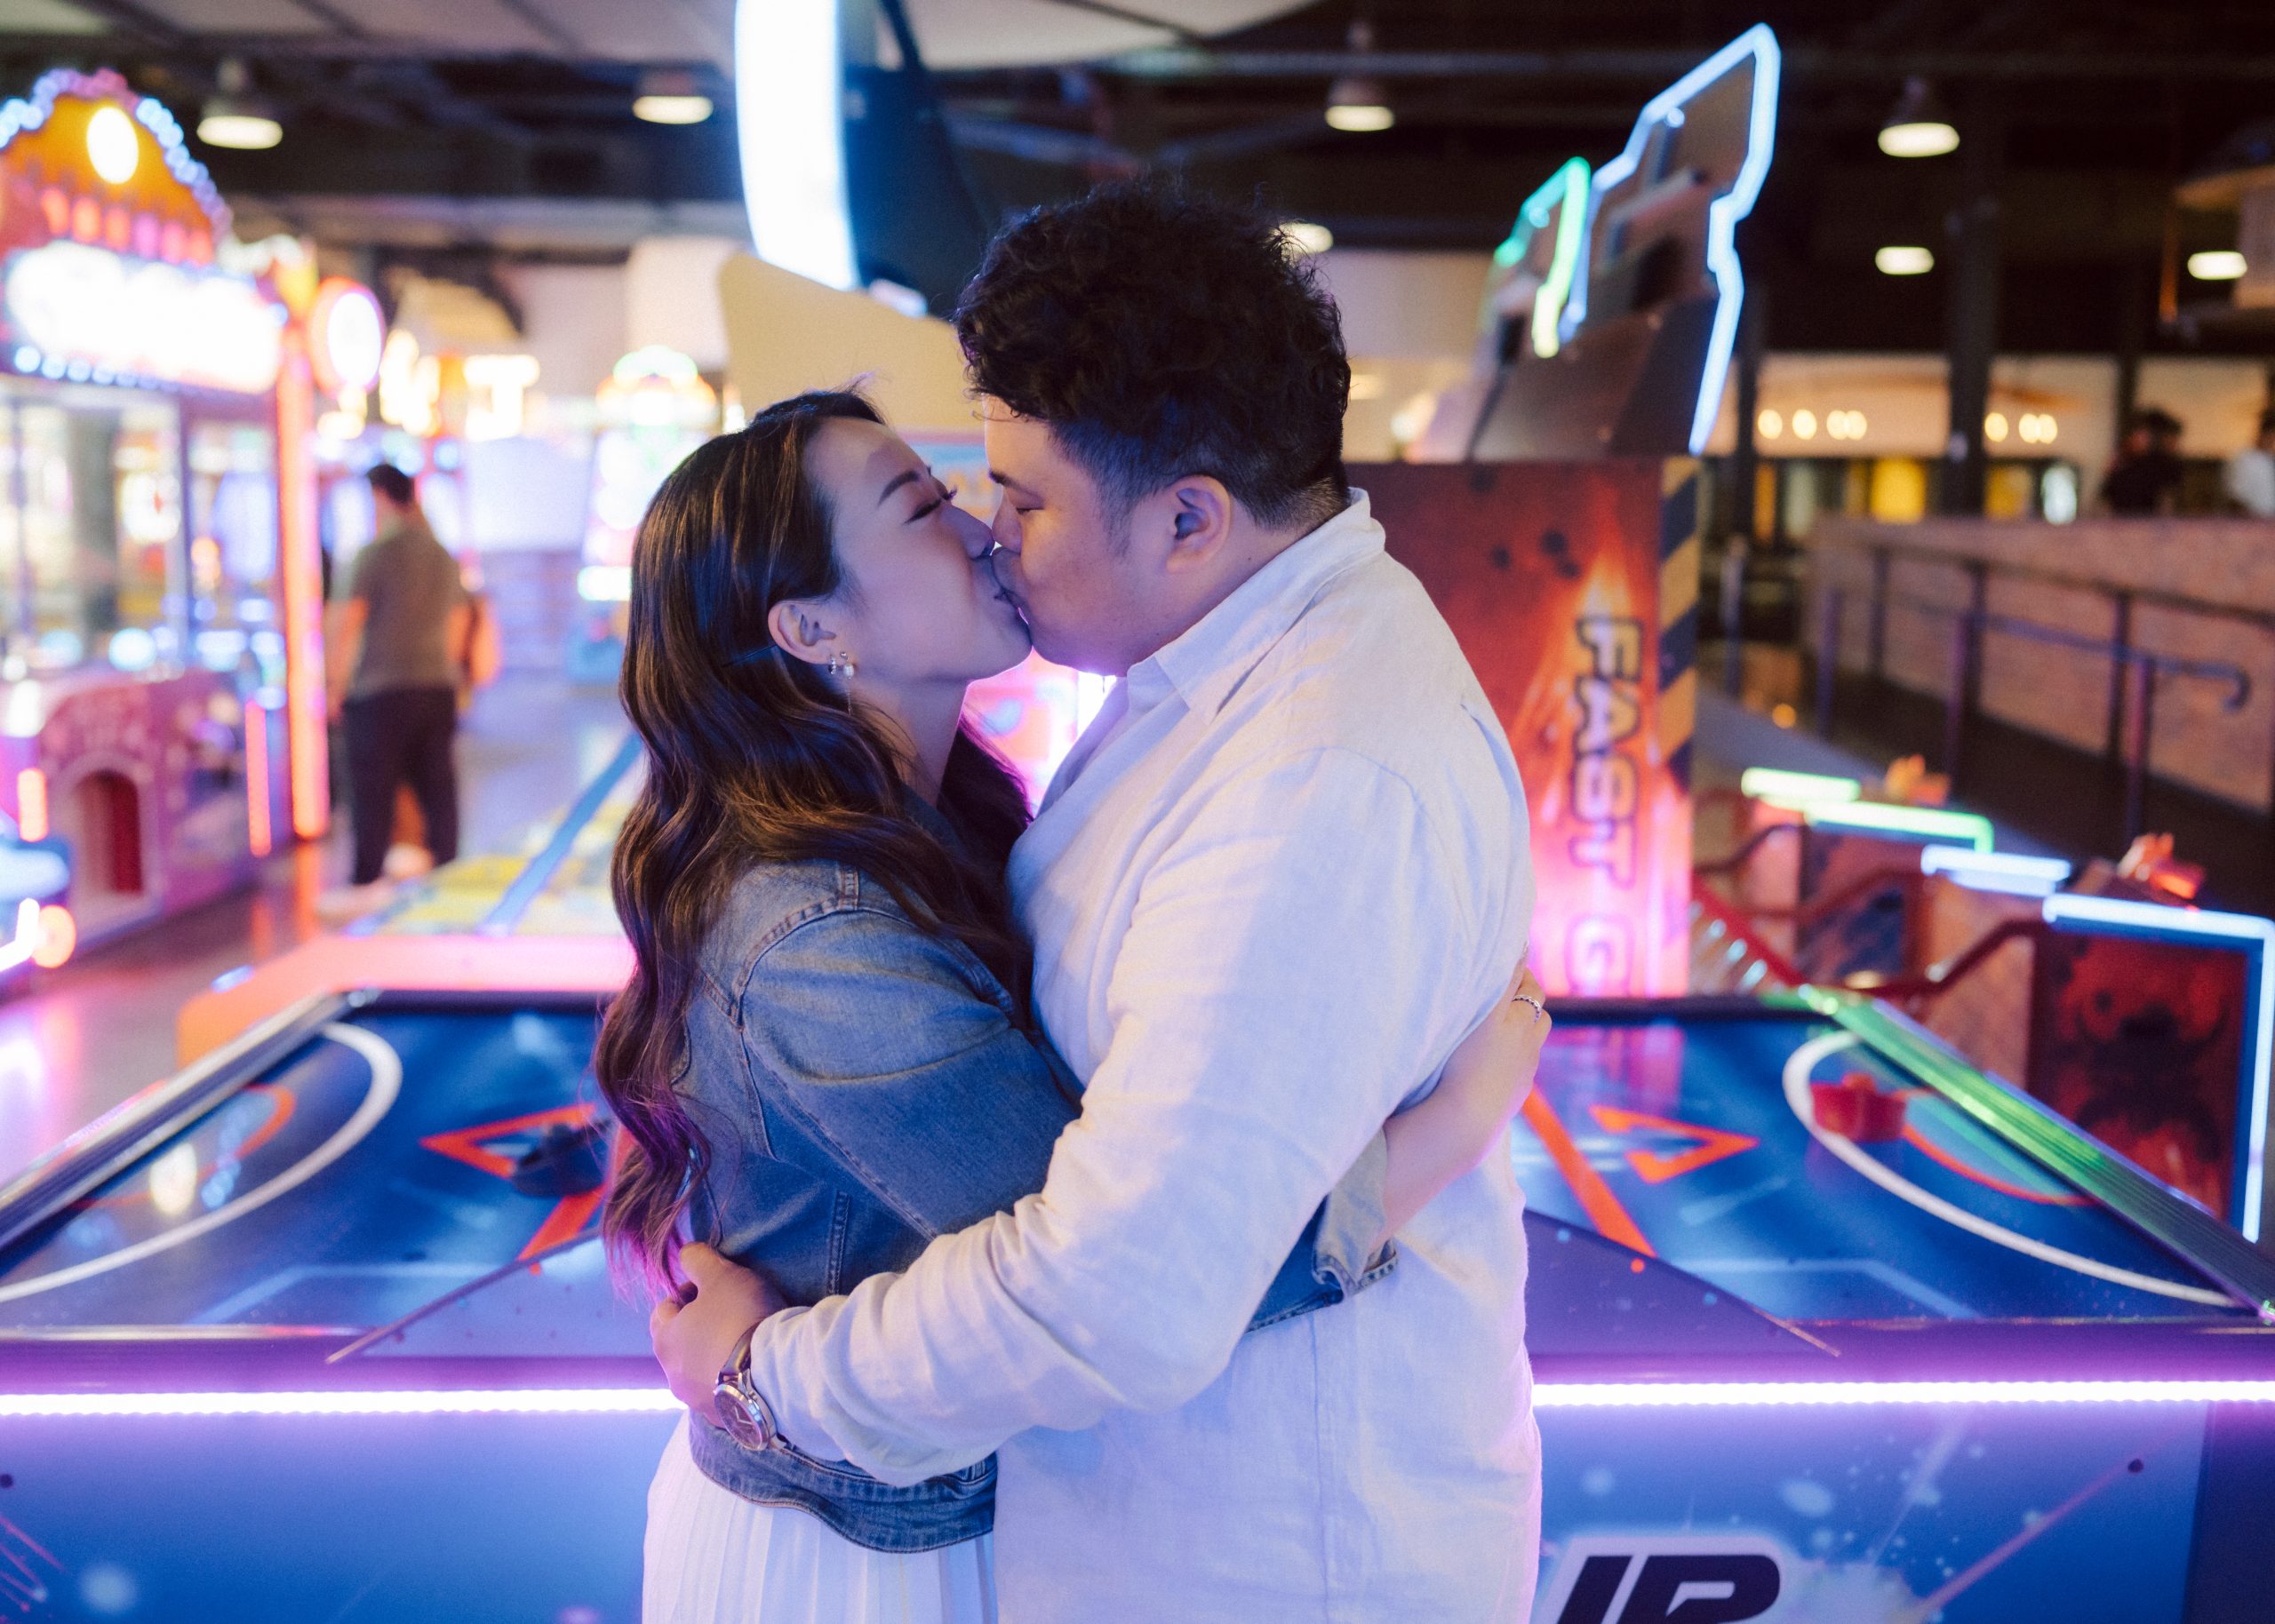 Couple in an embrace at an arcade. Arcade has neon lights in blues and pinks for a pre wedding photoshoot.